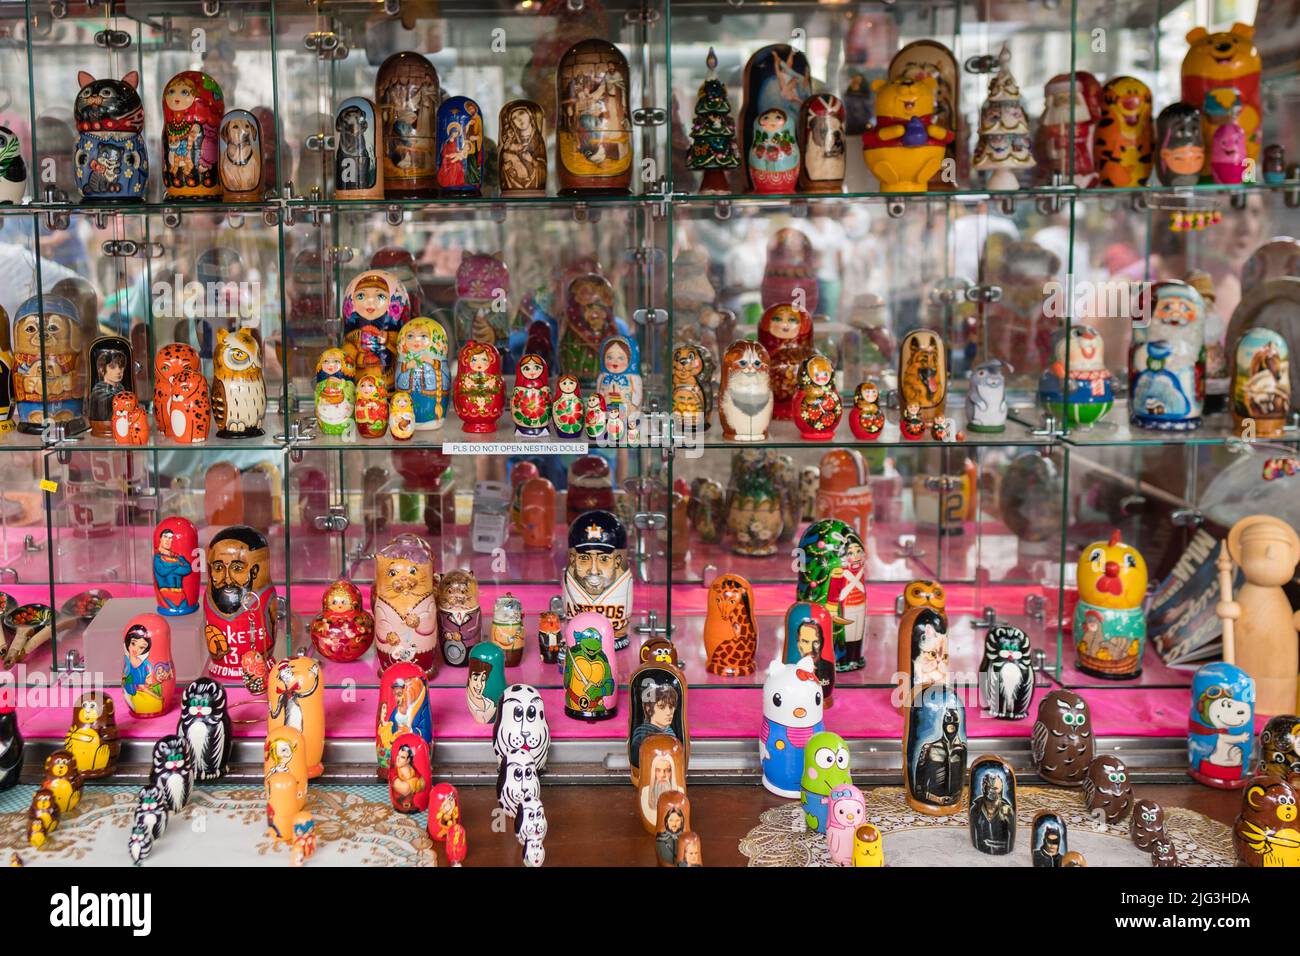 Boston, MA, US-June 11, 2022: Close-up of display of Russian nesting dolls at the busy Faneuil Hall-Quincy Market tourist destination. Stock Photo